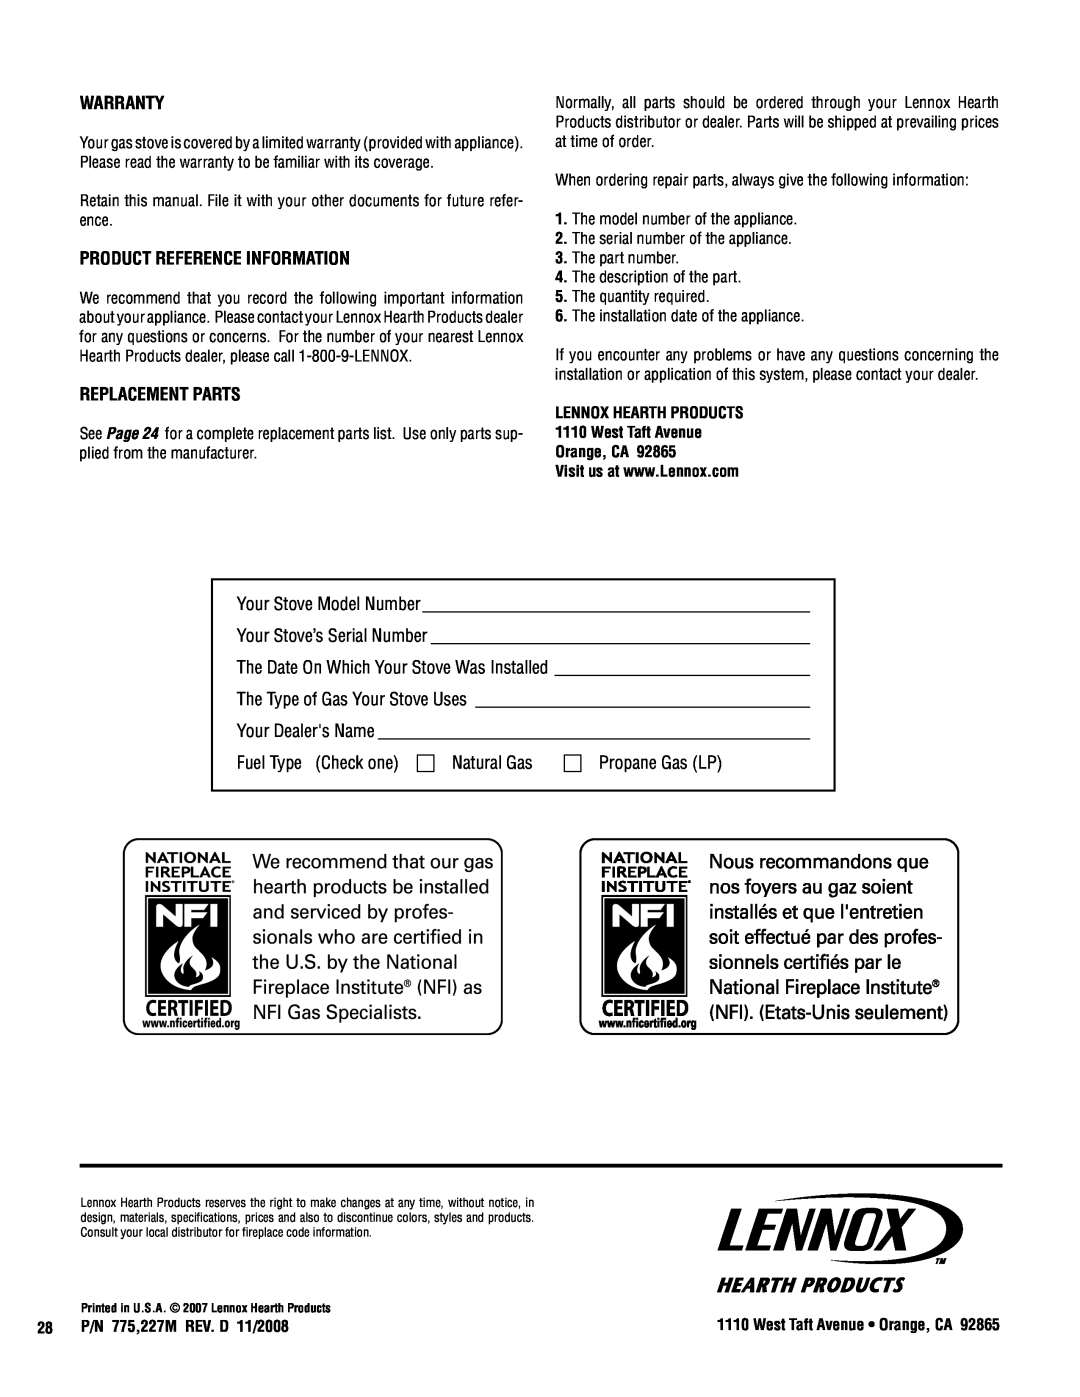 Lennox Hearth VIN operation manual Warranty, Product reference information, Replacement parts 